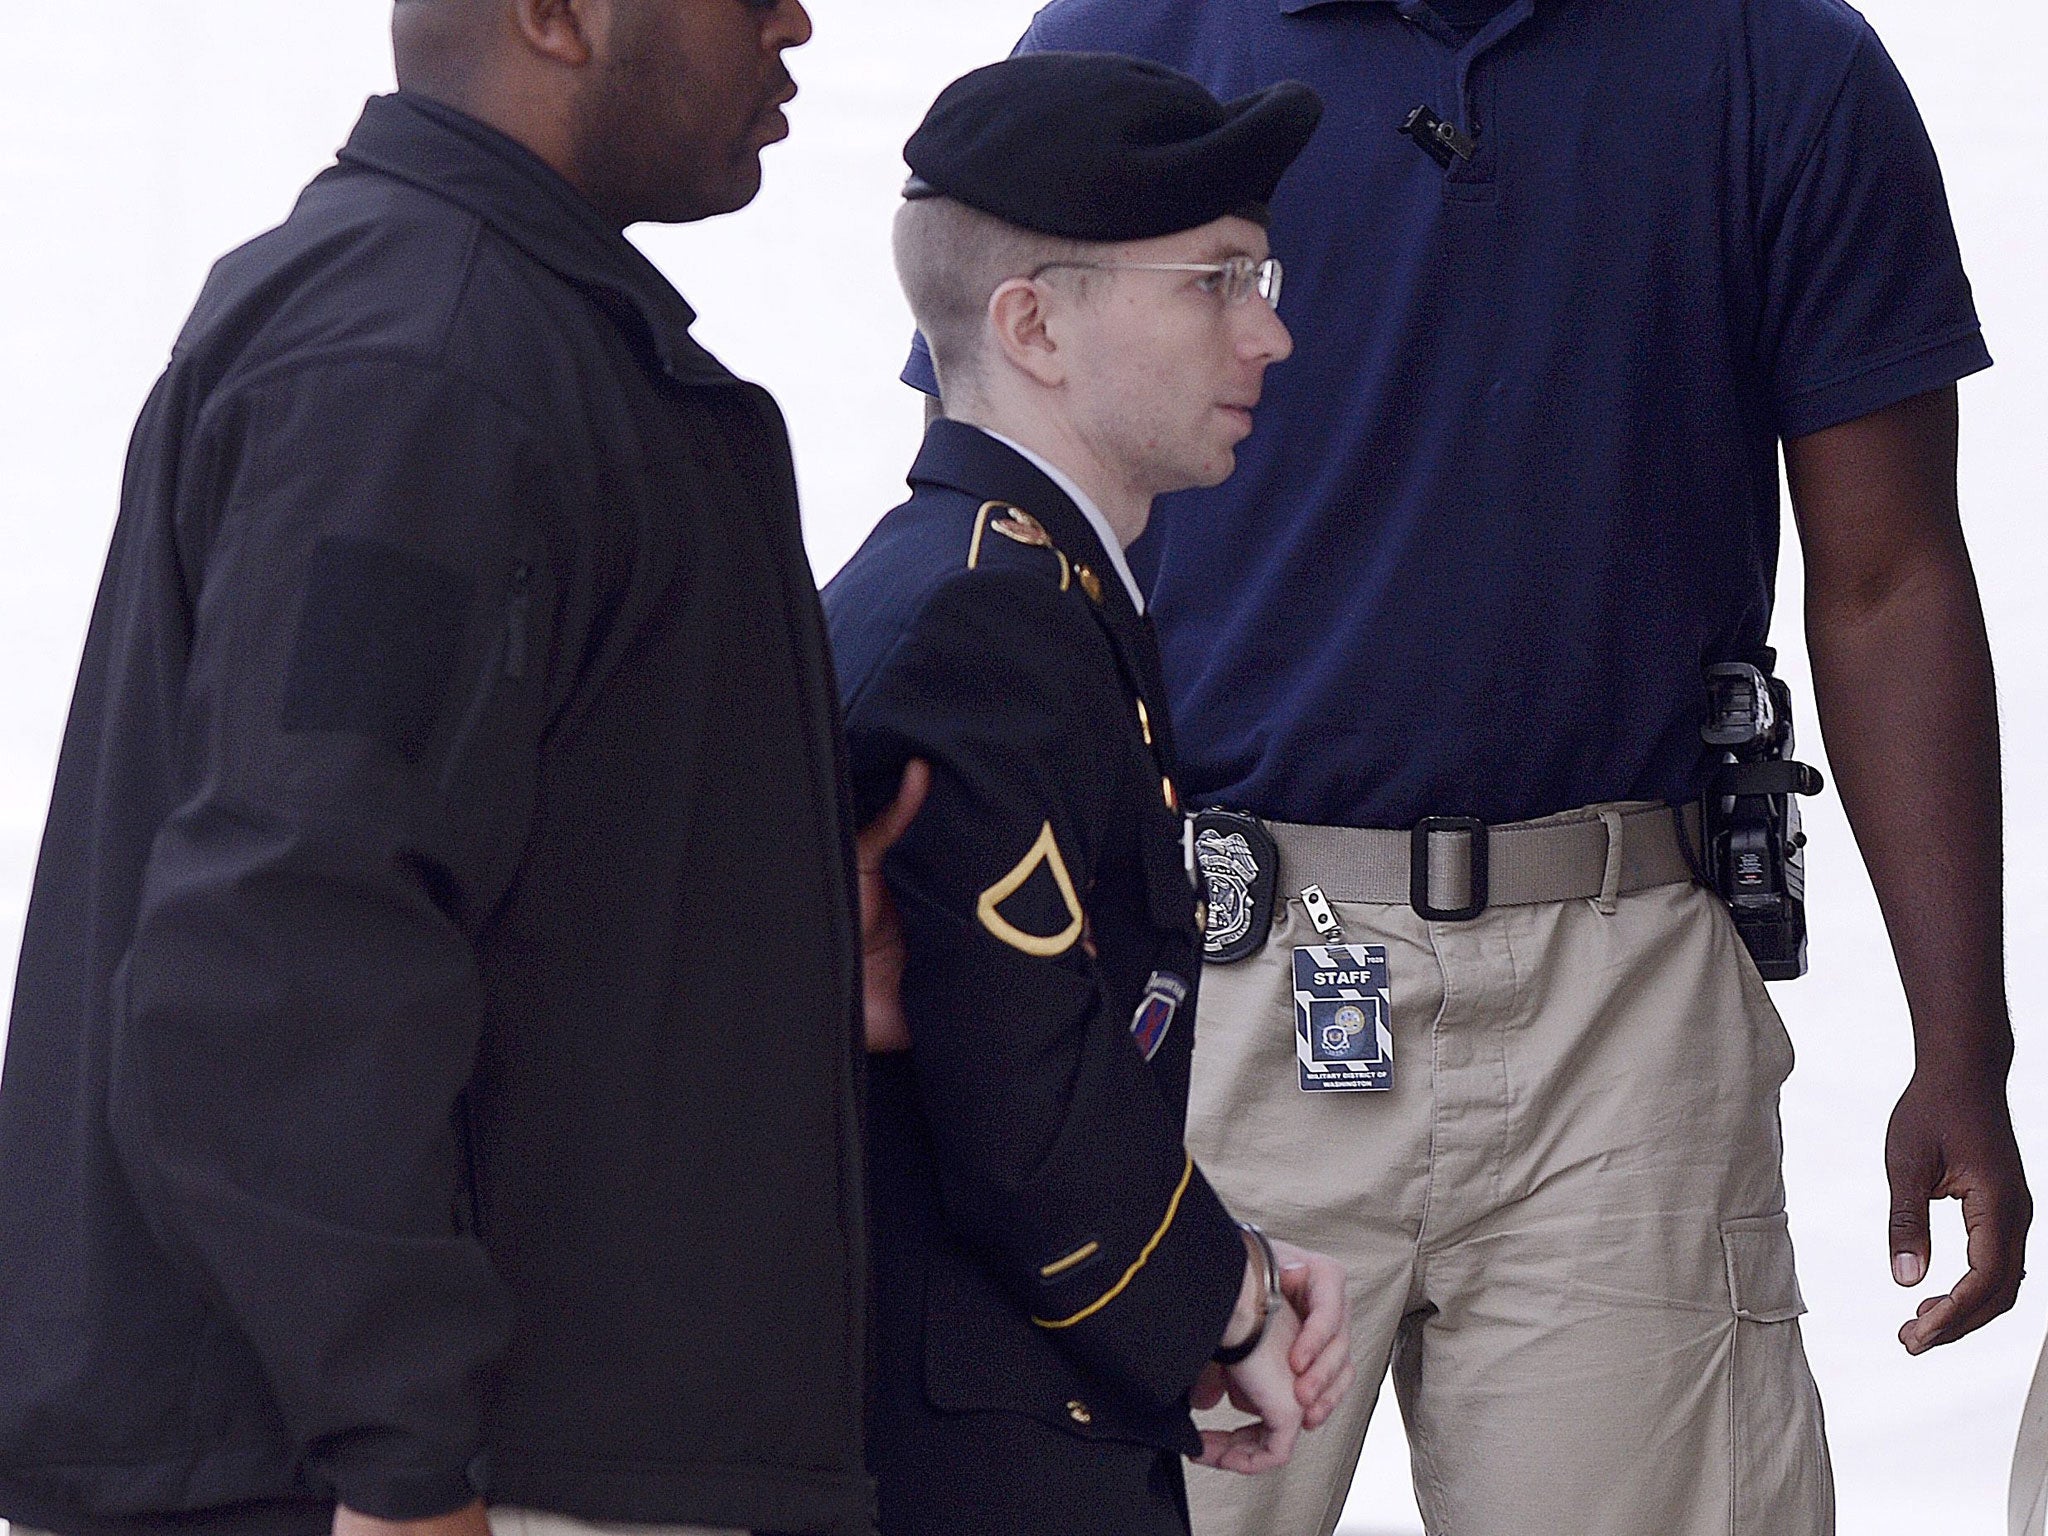 Bradley Manning is escorted into the courthouse during his trial